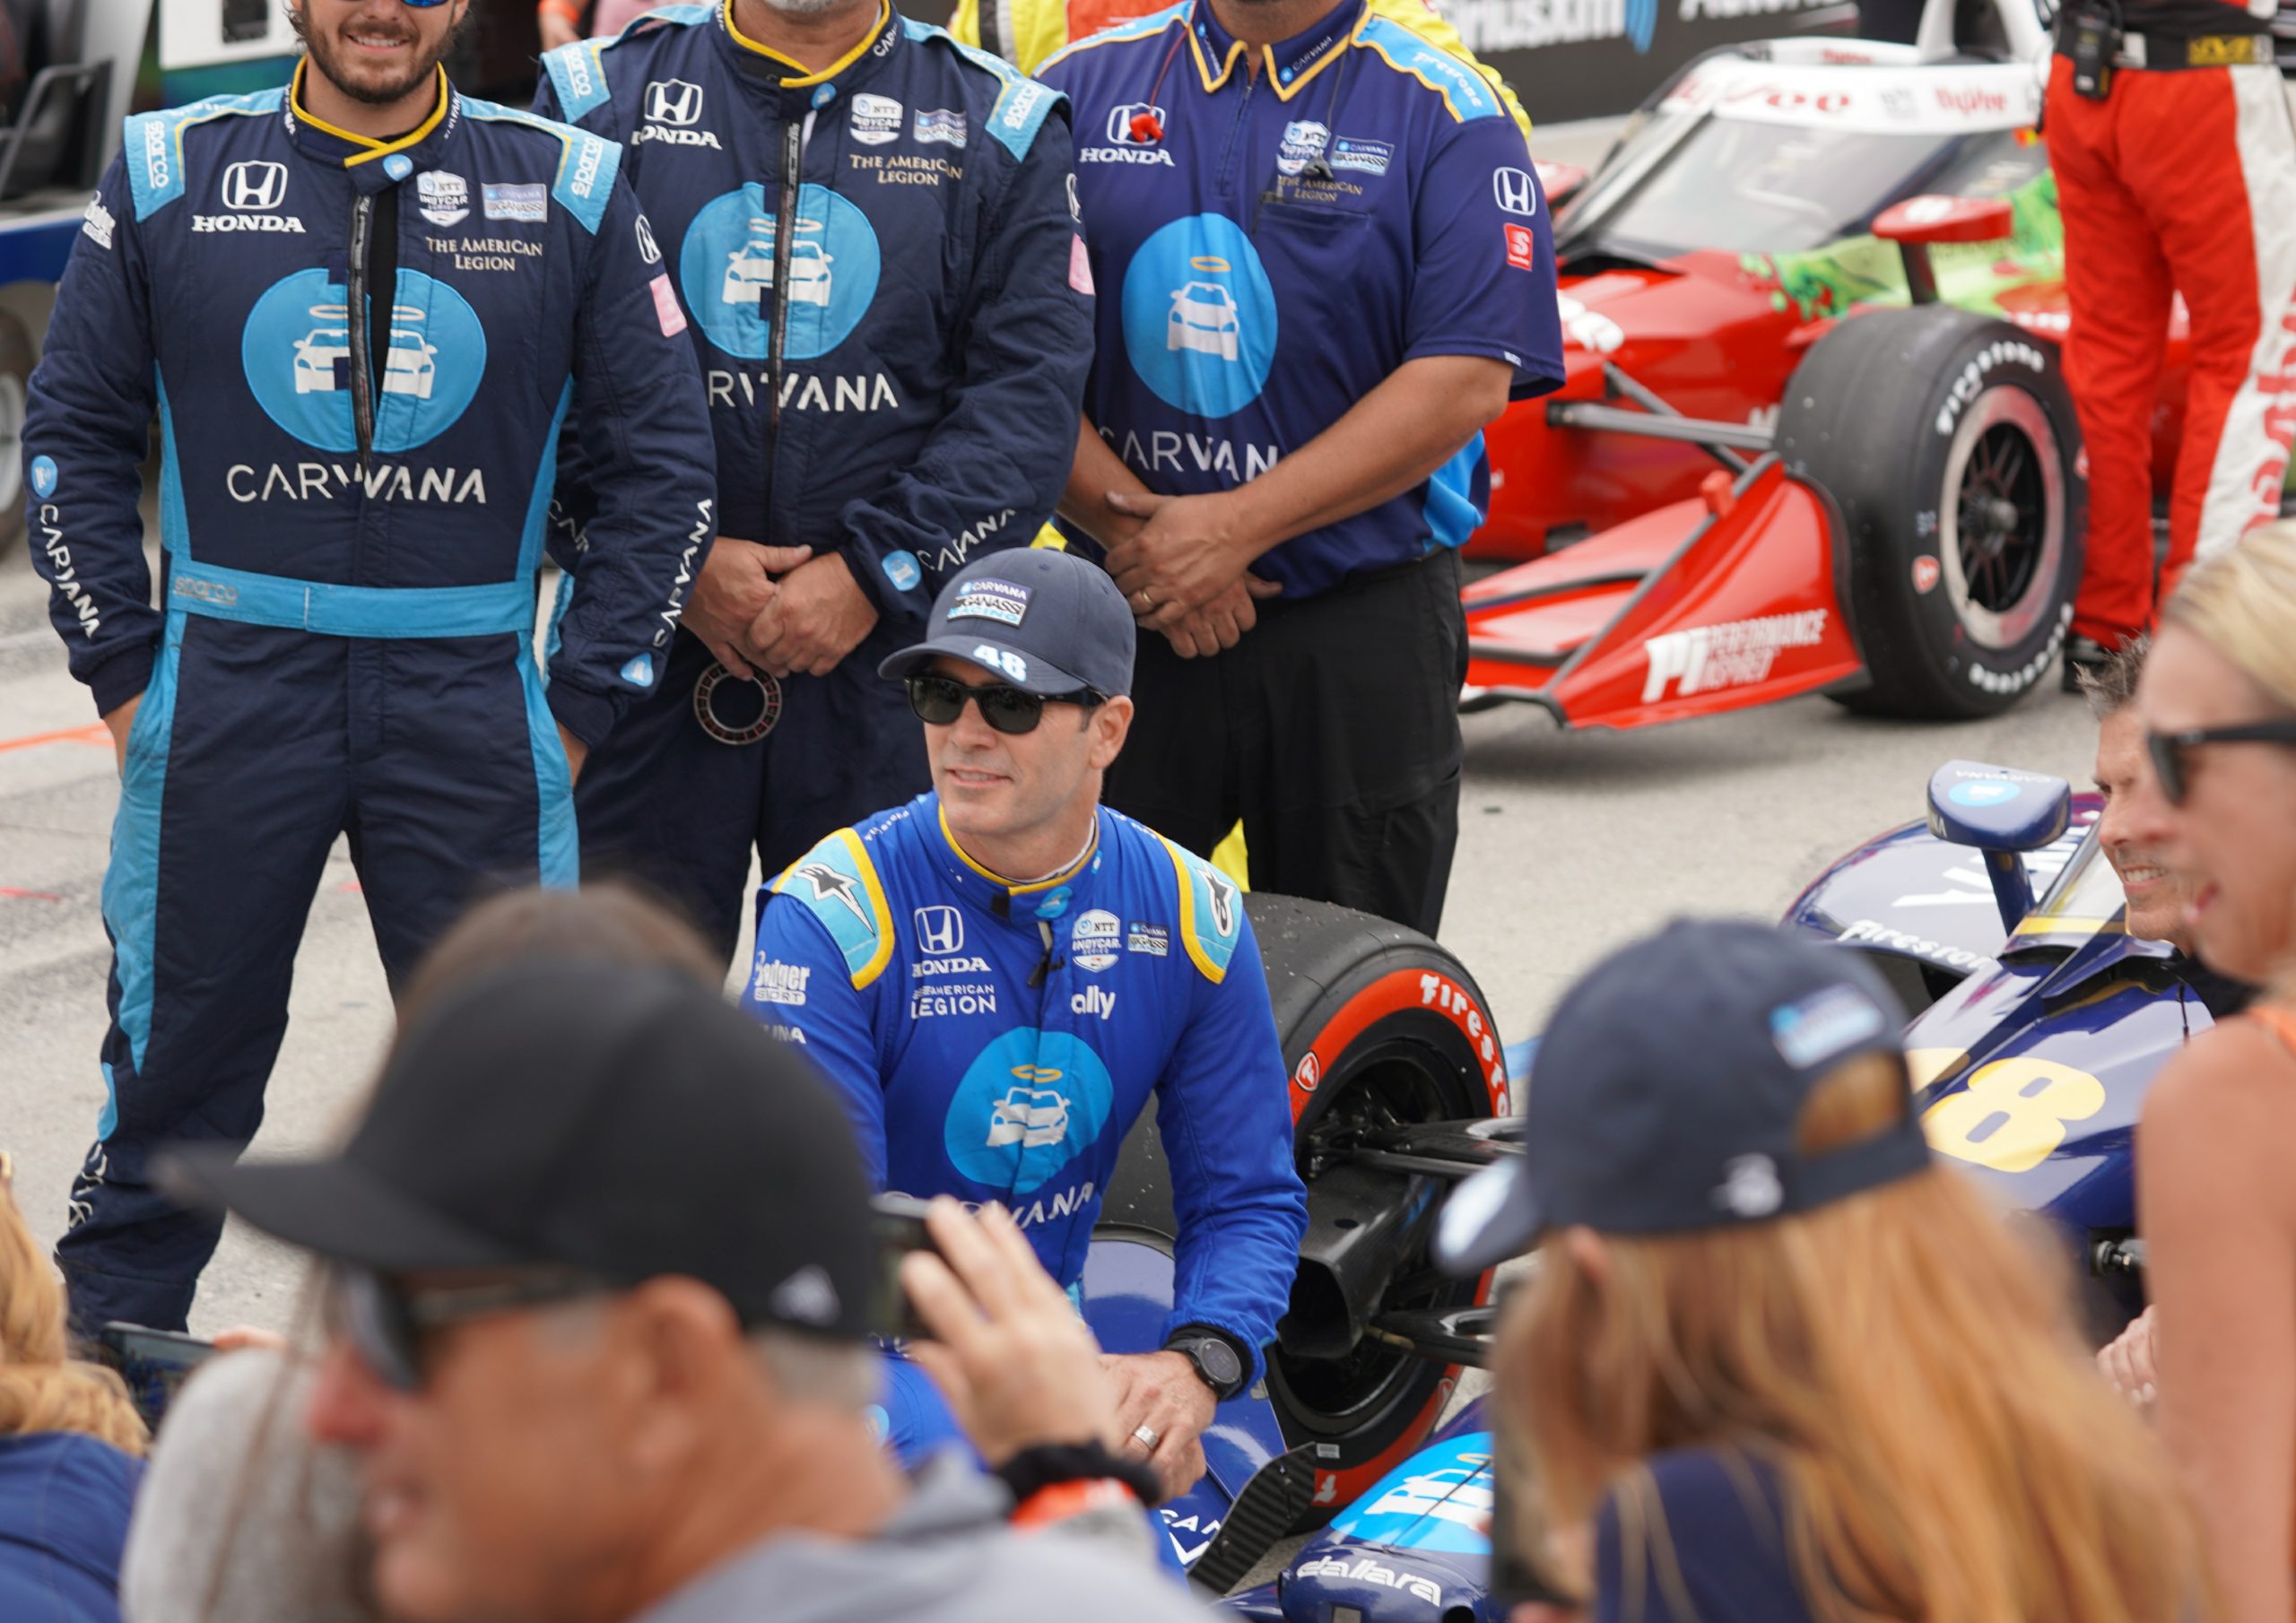 Jimmie Johnson poses for a photo with his crew behind him (and driver coach Scott Pruett flanking him on his left) on Shoreline Drive just minutes before the Acura Grand Prix of Long Beach.